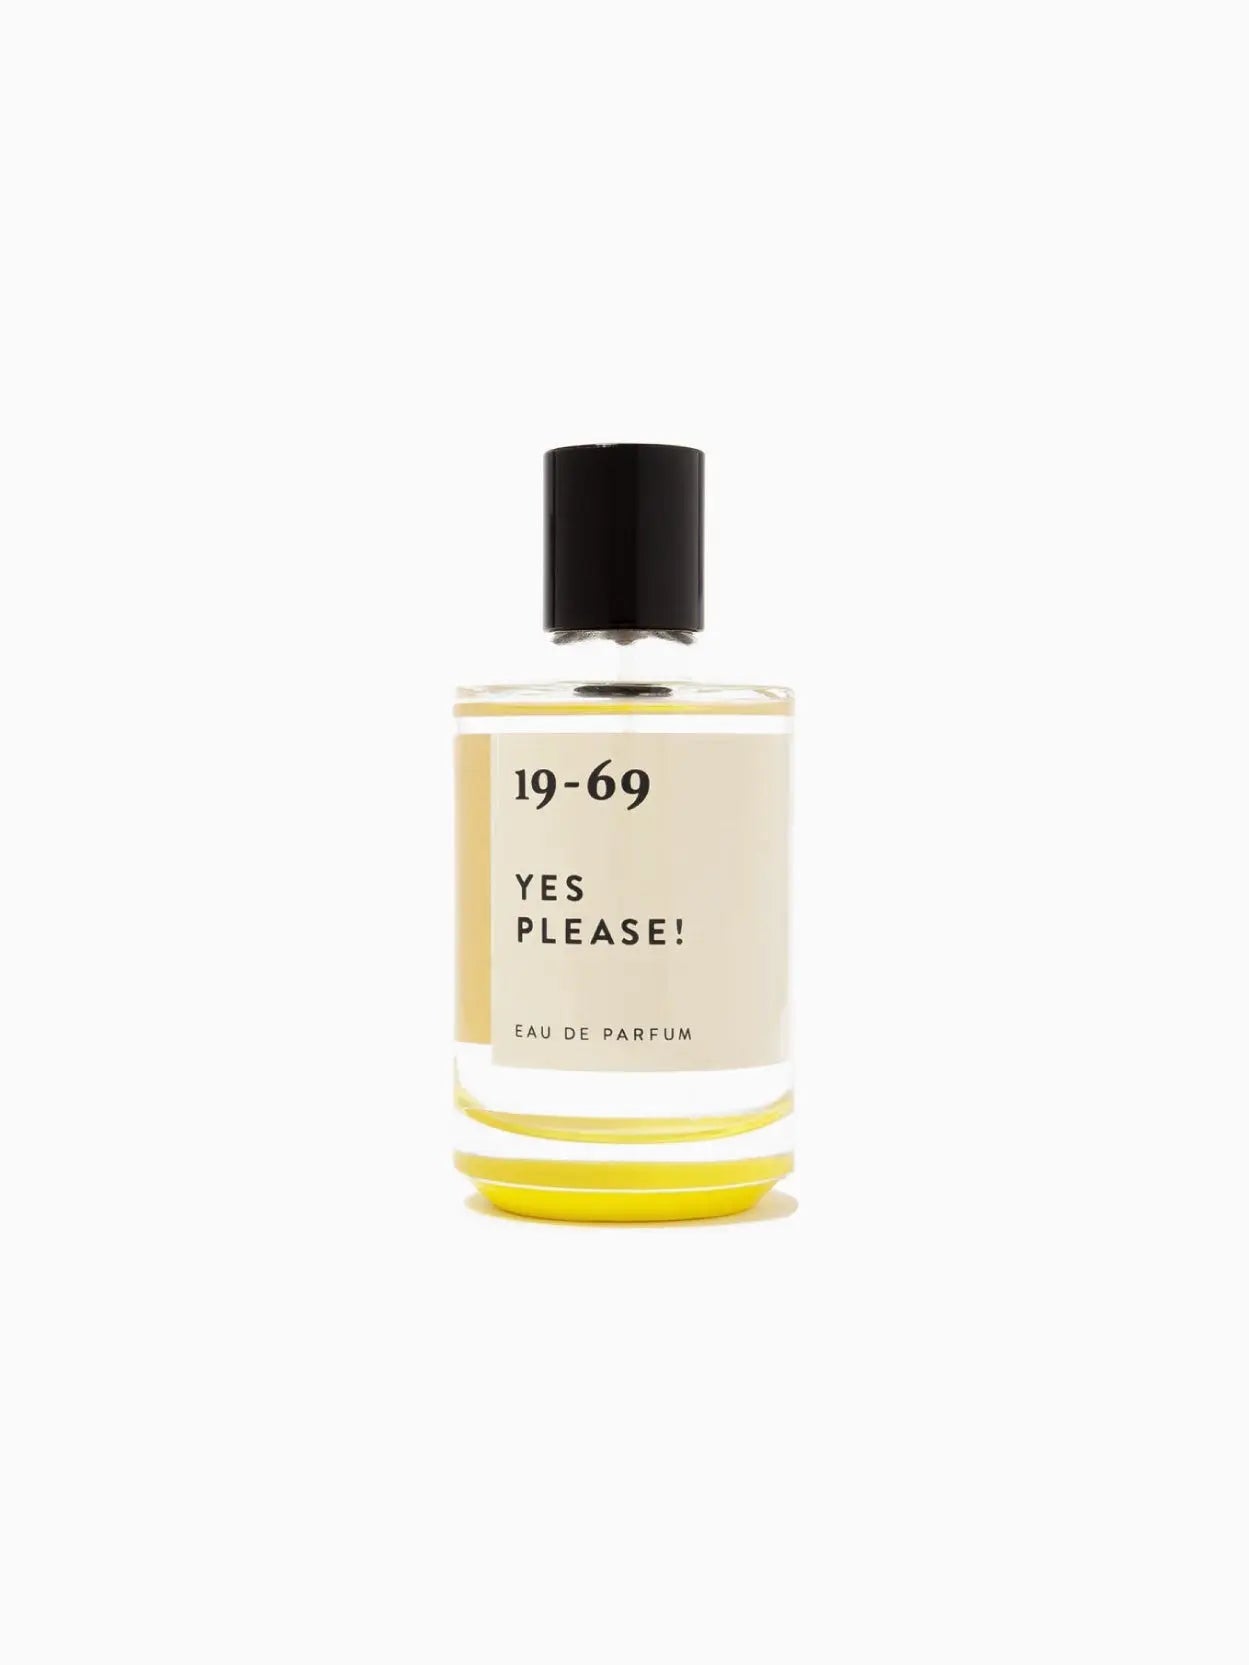 A bottle of Yes Please! 100ml eau de parfum by 19-69 with a black cap and the label "19-69 YES PLEASE!" written on the front. The liquid inside the clear bottle is yellow, perfectly staged against a pristine white background, available now at Bassalstore in Barcelona.